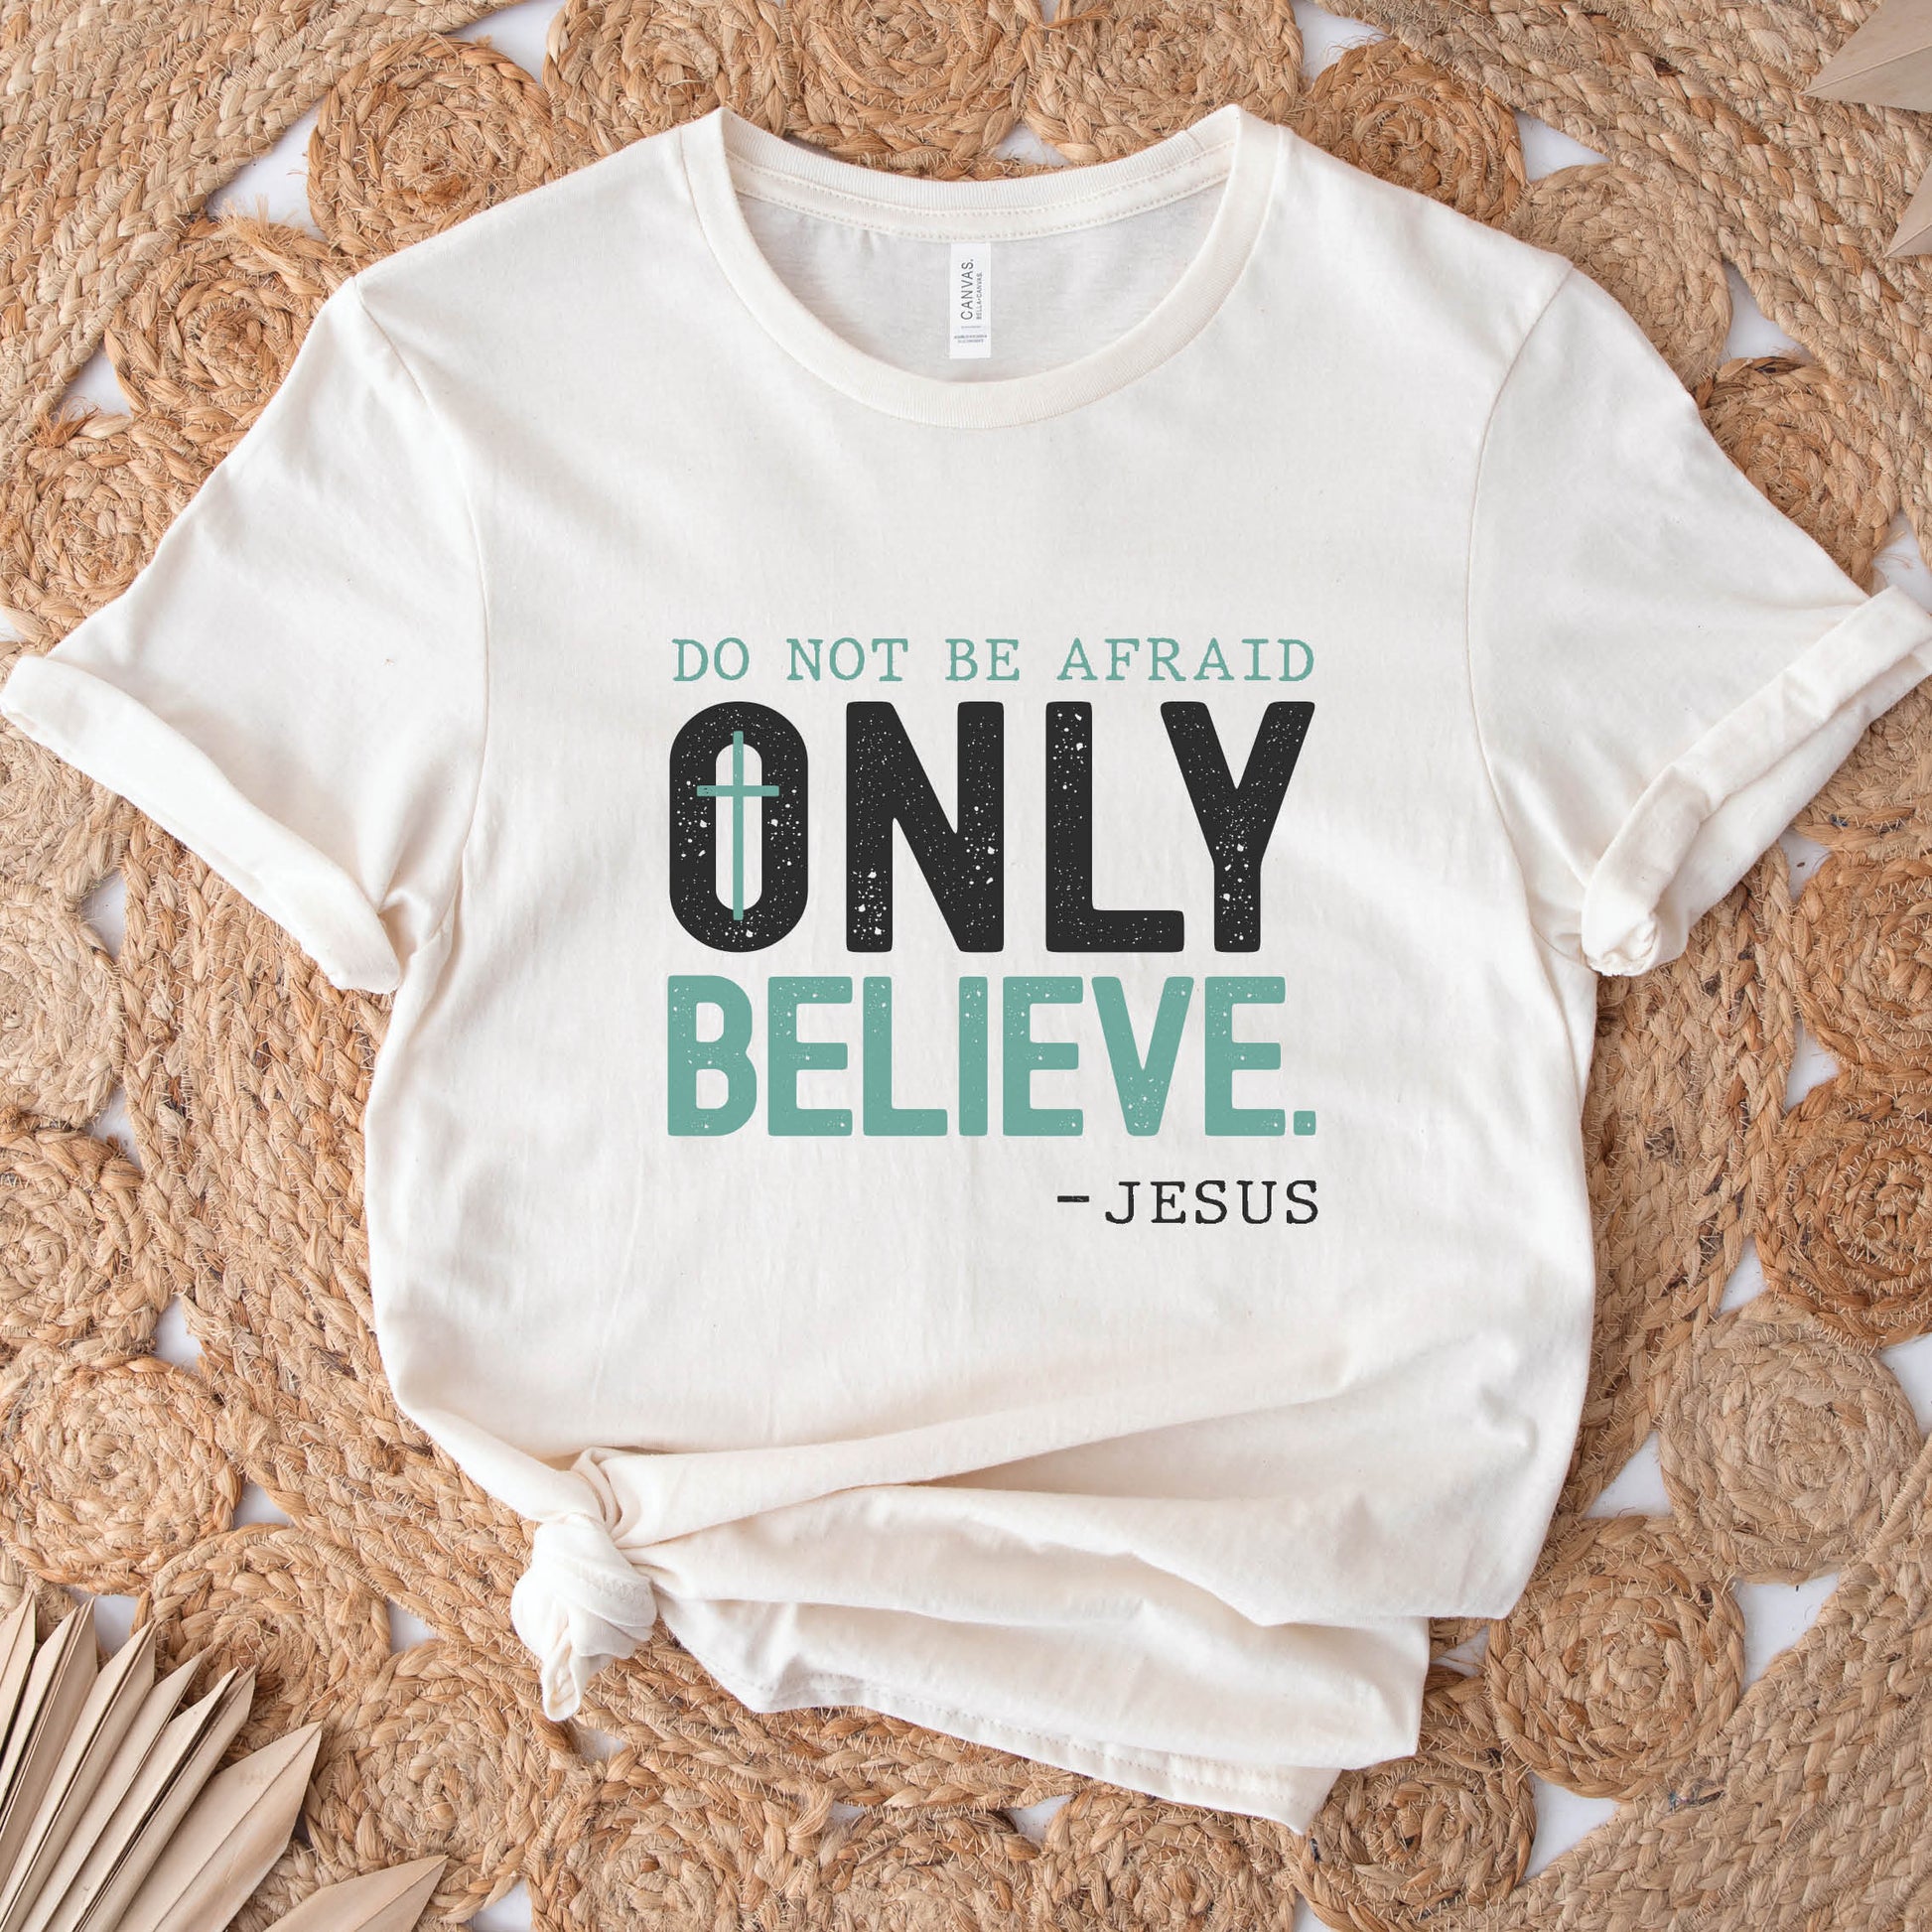 Do Not Be Afraid, Only Believe, Jesus Quote Christian aesthetic Mark 5:36 healing miracle bible verse textured black and teal wording printed on soft cream unisex t-shirt for men and women